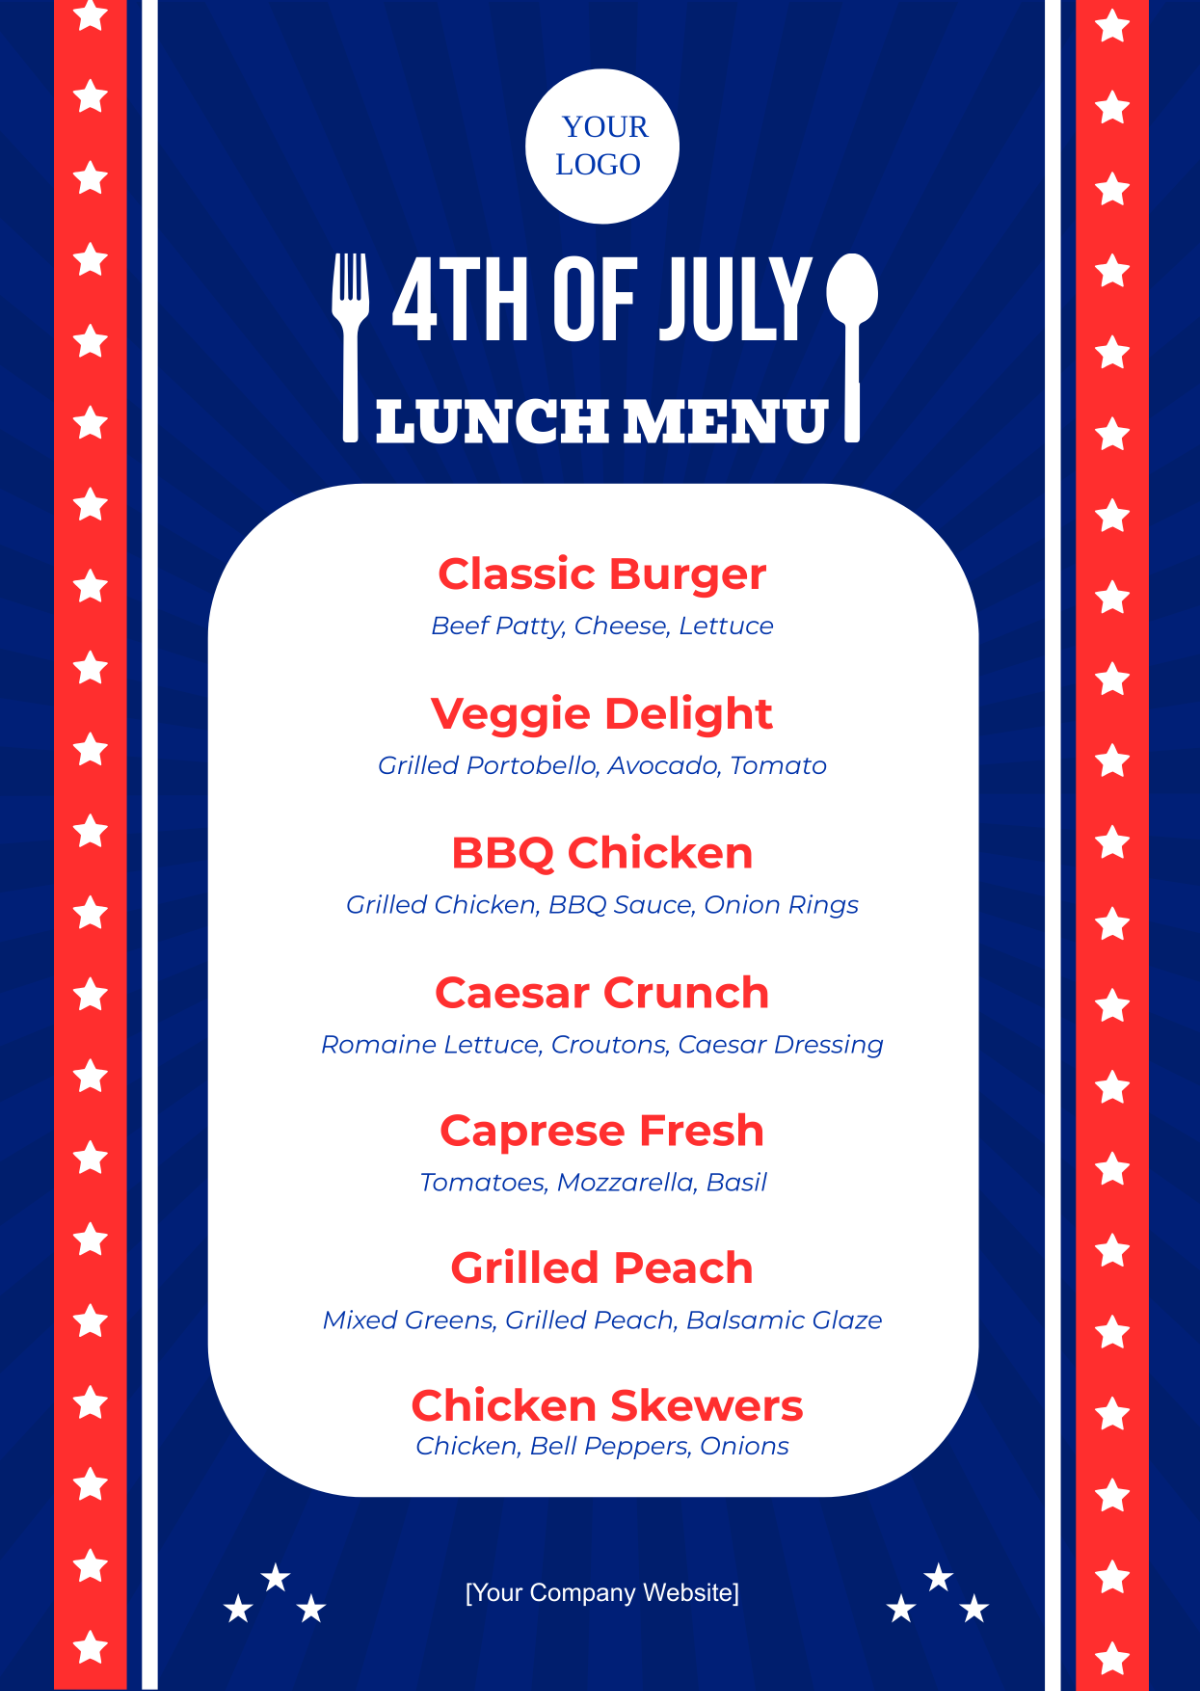 4th of July Lunch Menu